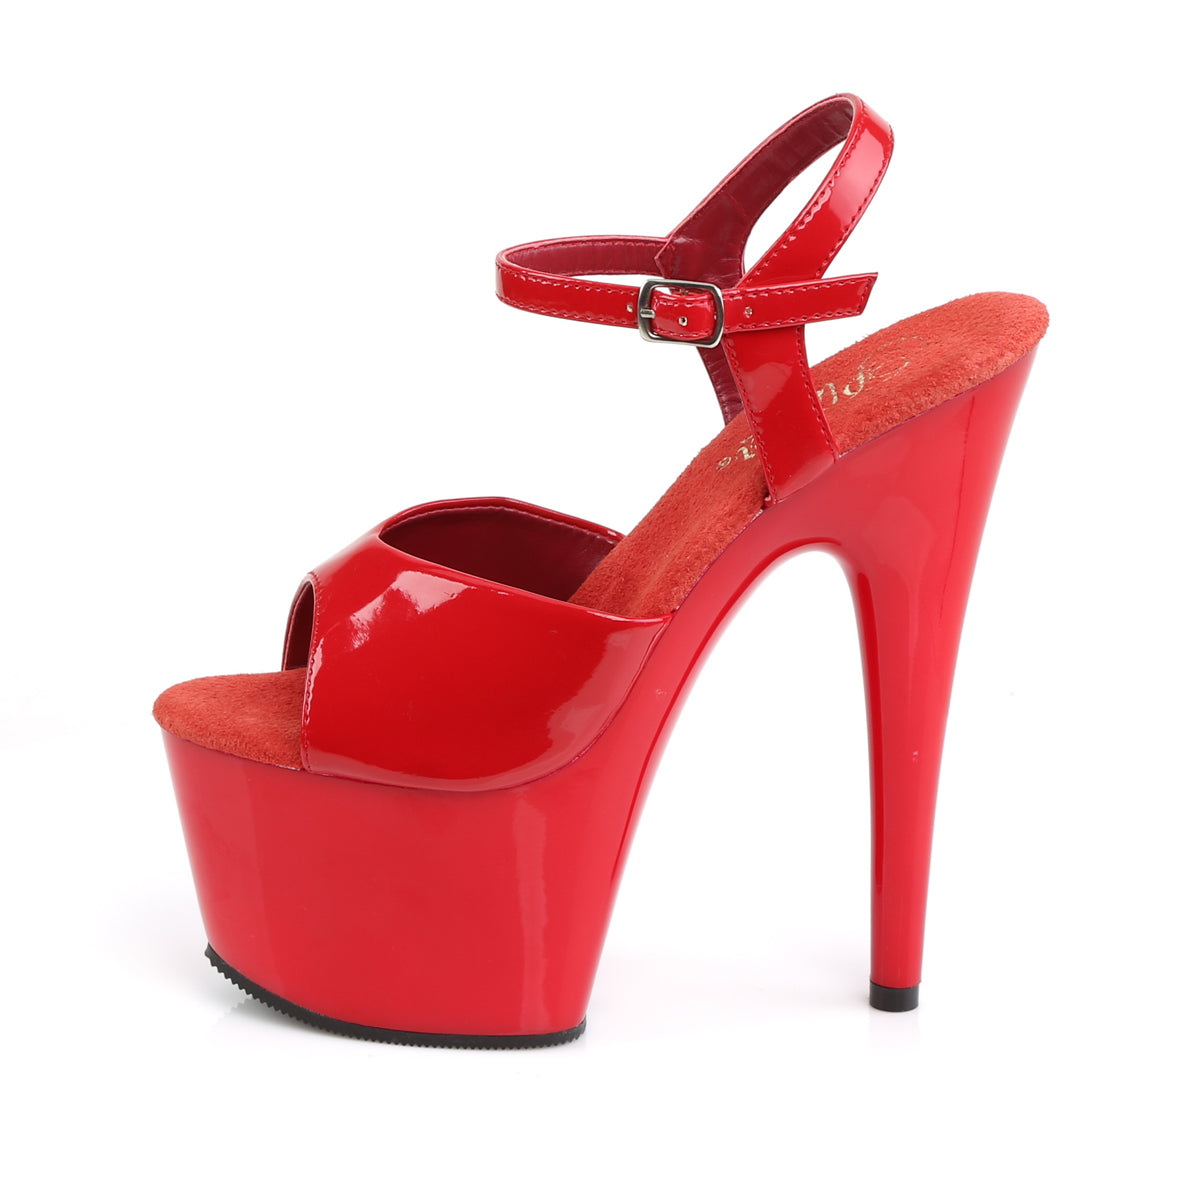 PLEASER ADORE-709 RED 7 INCH HIGH HEEL PLATFORM SHOES SIZE 10